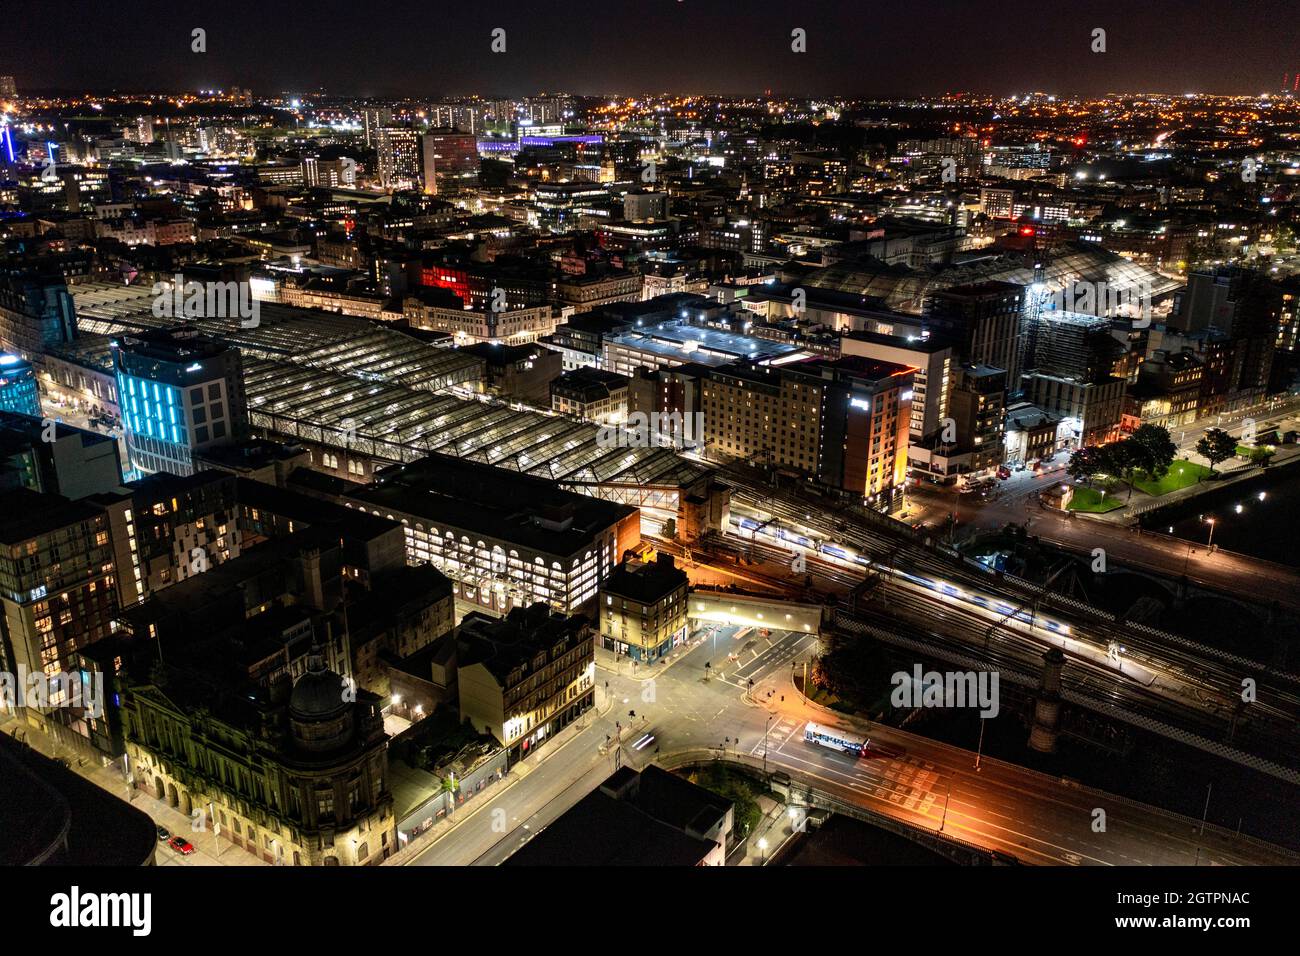 Glasgow, Scotland, UK. 29 September 2021 PICTURED:  Glasgow Central Station seen from the air at night. Glasgow Central connects trains to the West of Scotland and has a direct link with London down the West Coast line.  Aerial night drone view of Glasgow City Centre showing the lit up streets and the lights and coloured neon light shining and reflecting off of the glass exterior of the buildings.  Credit: Colin Fisher Stock Photo